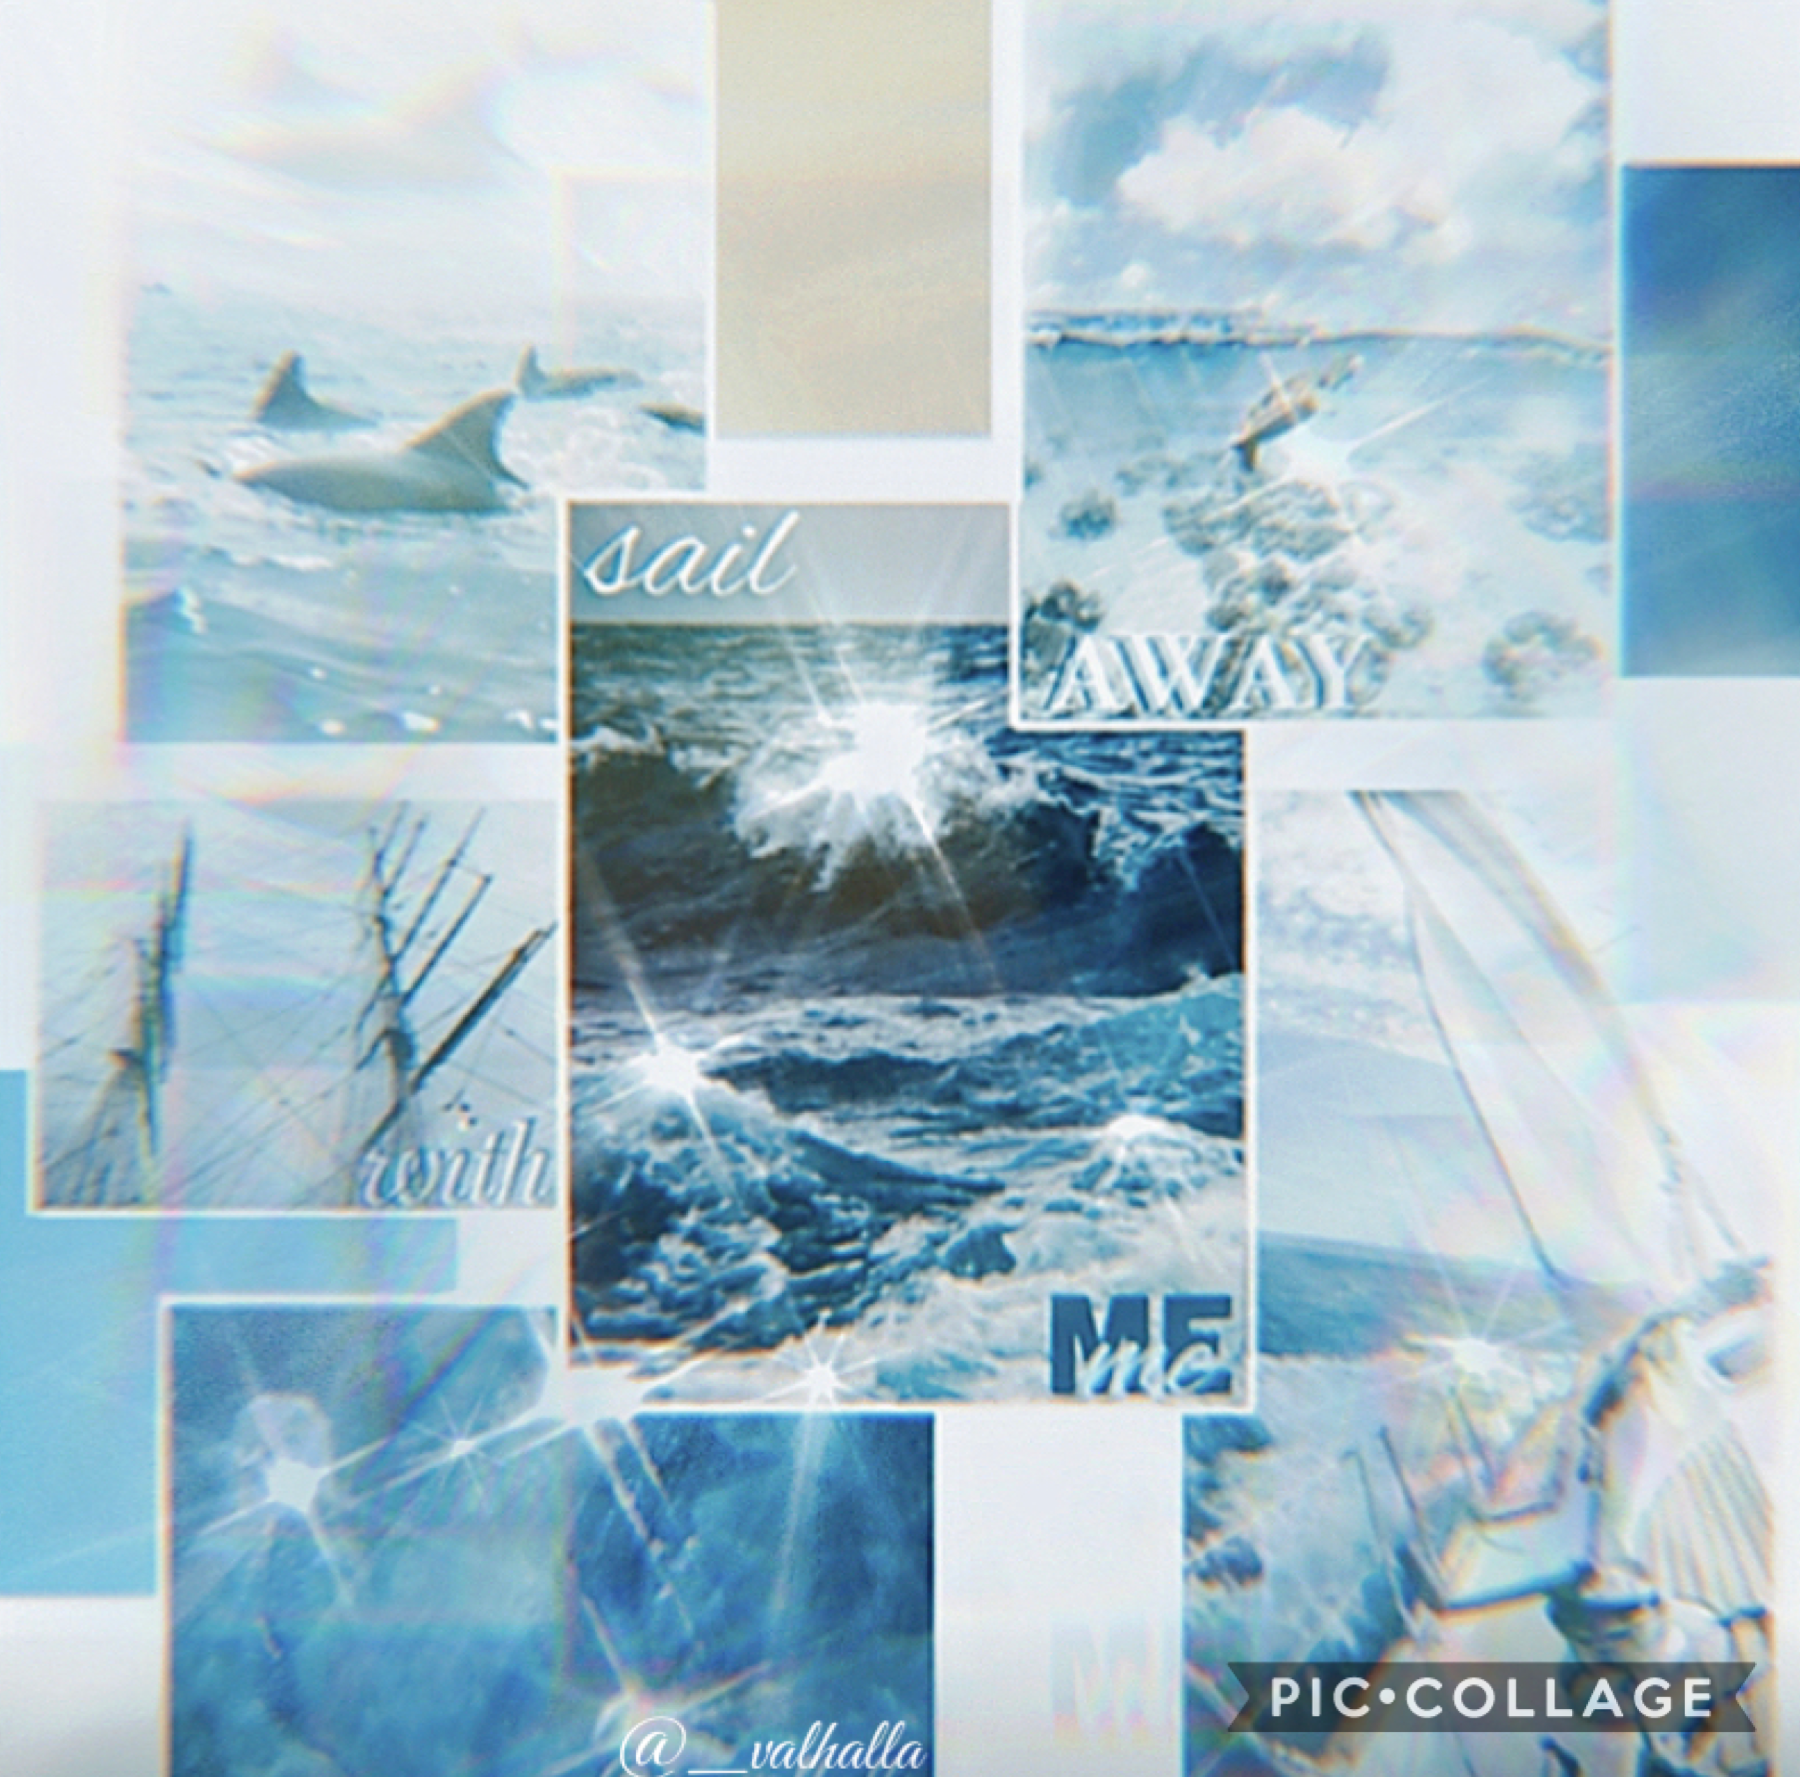 🌊tap!🌊
This is my entry to round one of @TheCraftyAdventurer ‘s summer games. 
It took me about 20 mins, so not my best but it matches my aesthetic so I’m posting it.
That’s all for this episode of ✨The Adventures of Magic Mushroom✨
Peace out loves, xo
🌊